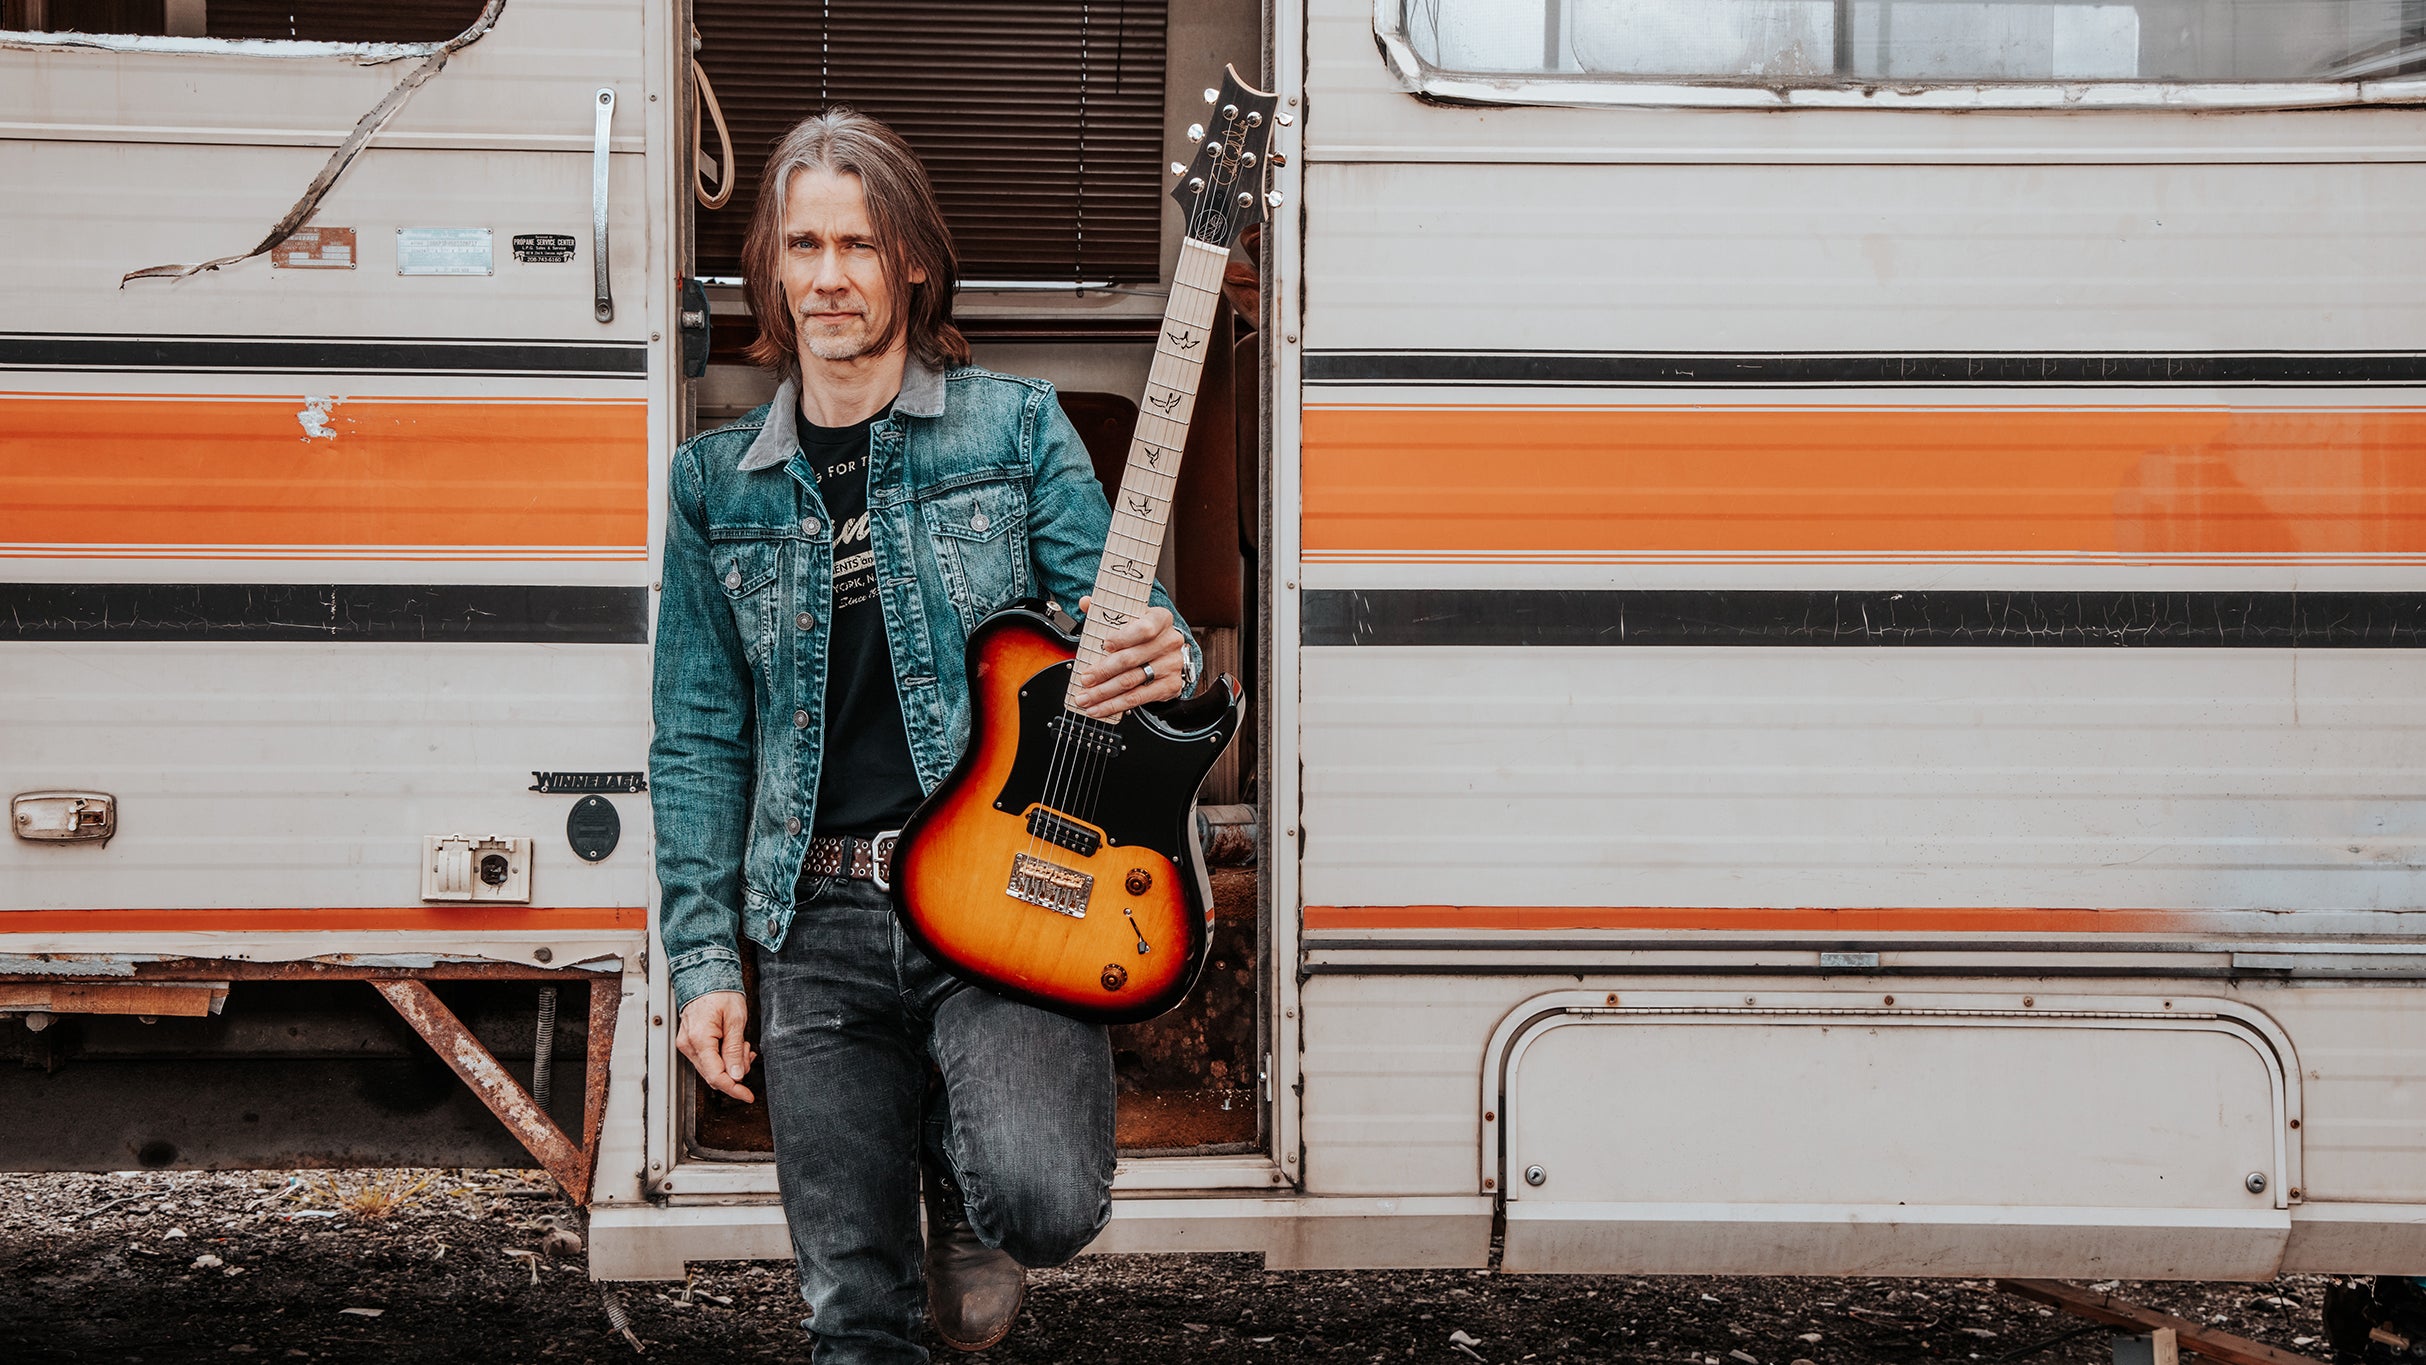 presale password for Myles Kennedy - The Art Of Letting Go Tour (18+) presale tickets in Boston at Brighton Music Hall presented by Citizens